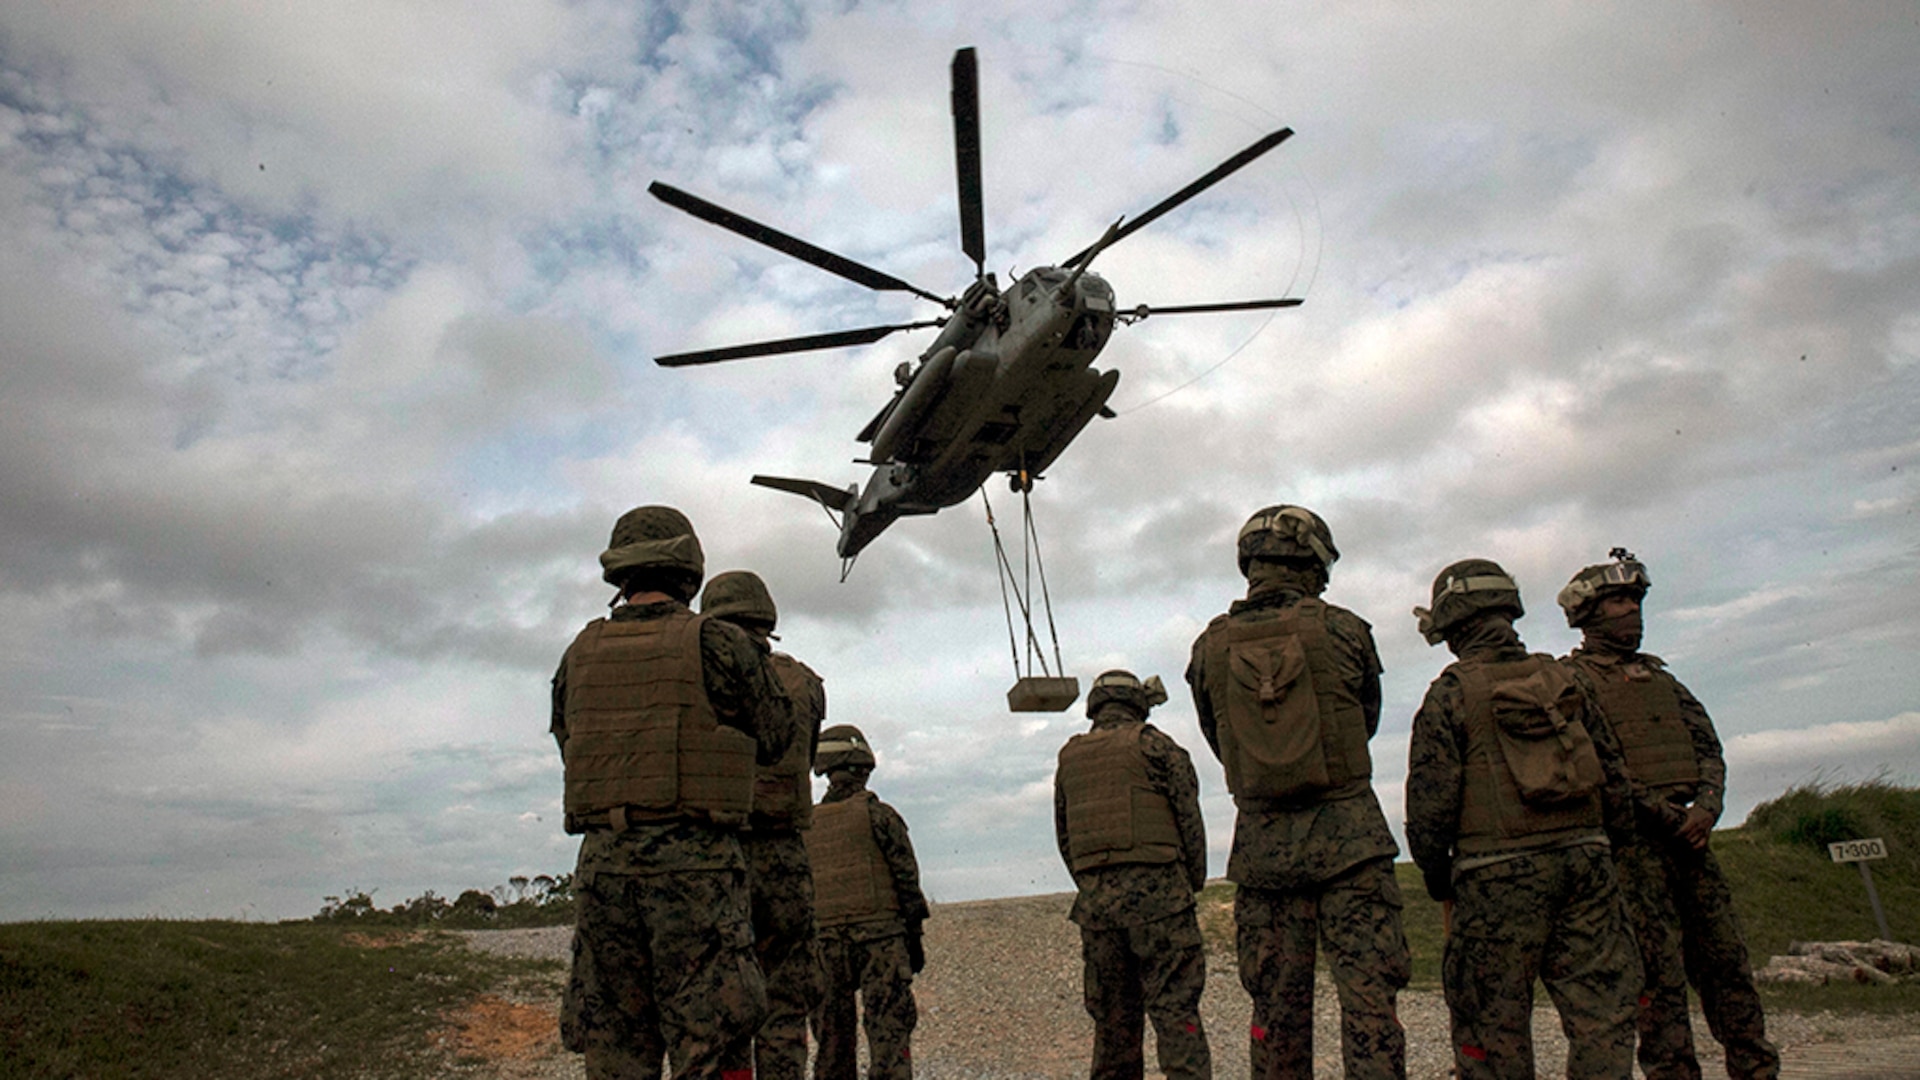 Marines conduct a helicopter support team exercise at Marine Corps Air Station Futenma, Okinawa, Japan, April 22, 2016. The Marines are landing support specialists, commonly referred to as red patchers, with Landing Support Detachment, 3rd Transportation Support Battalion, Combat Logistics Regiment 3, 3rd Marine Logistics Group, III Marine Expeditionary Force. 